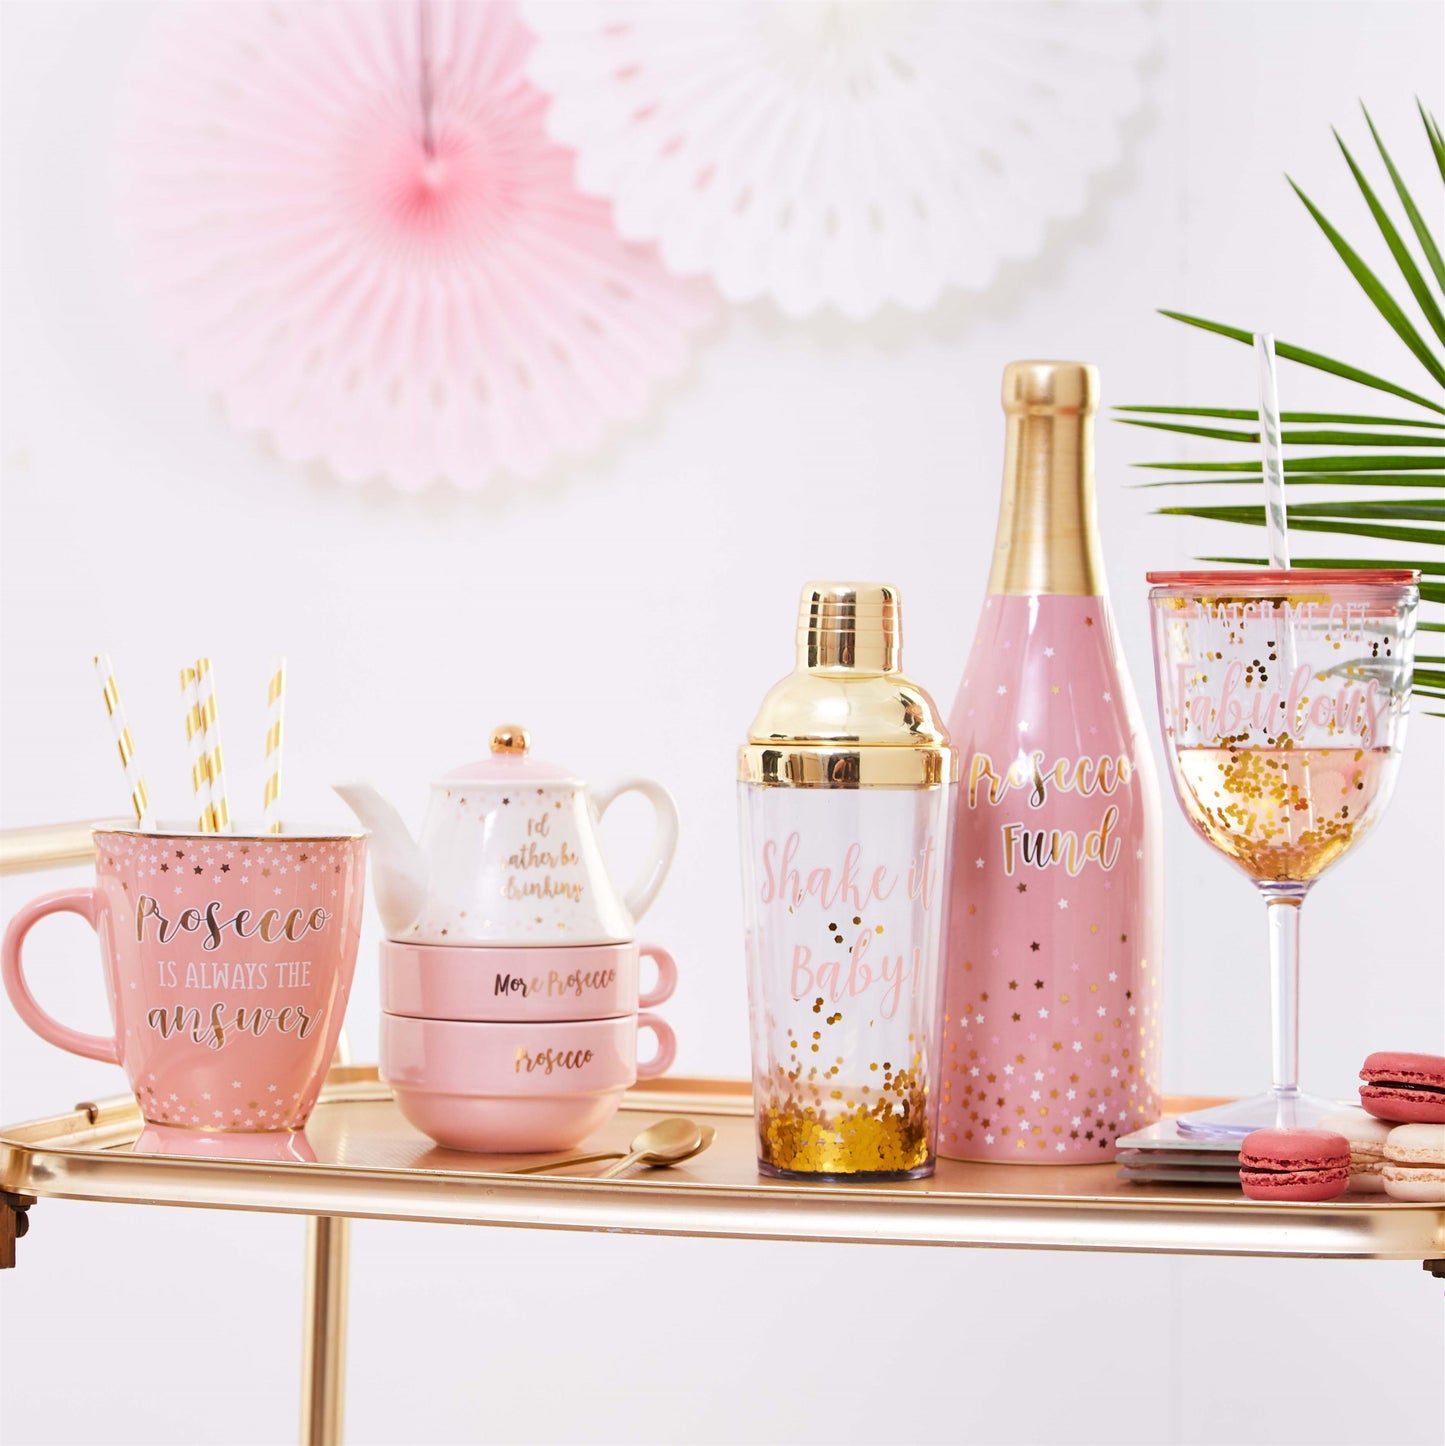 A pretty pink money bank in the form of a prosecco bottle!